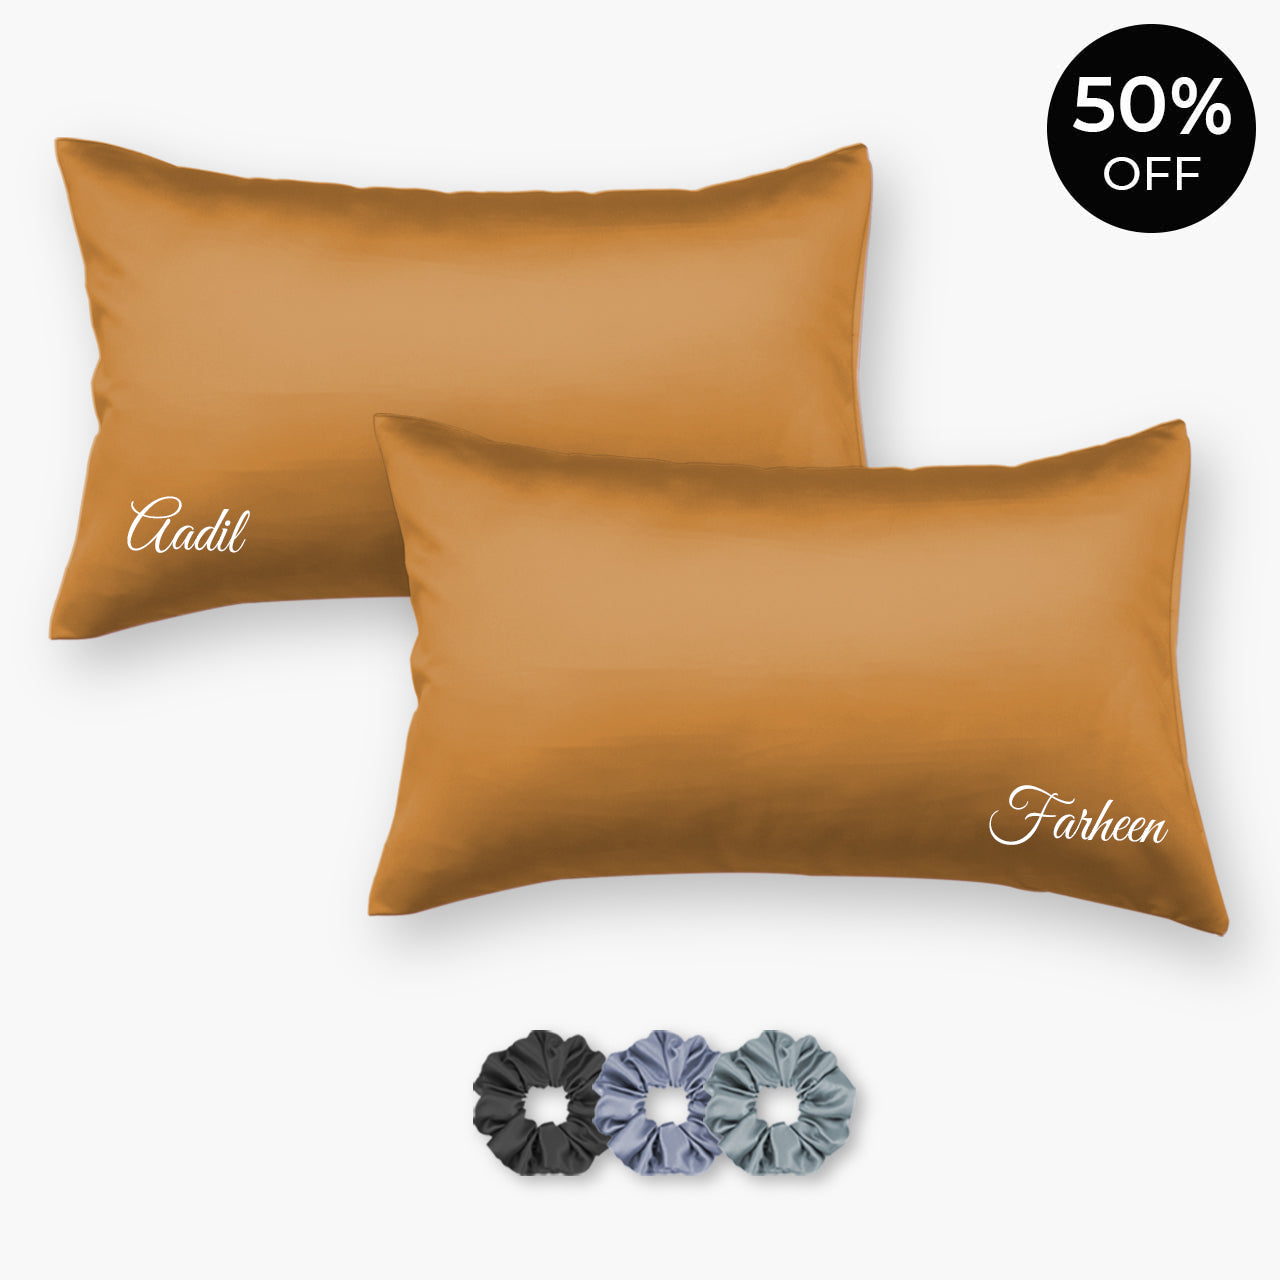 Personalized Satin Pillowcases - Pack of 2 (With 3 free scrunchies)